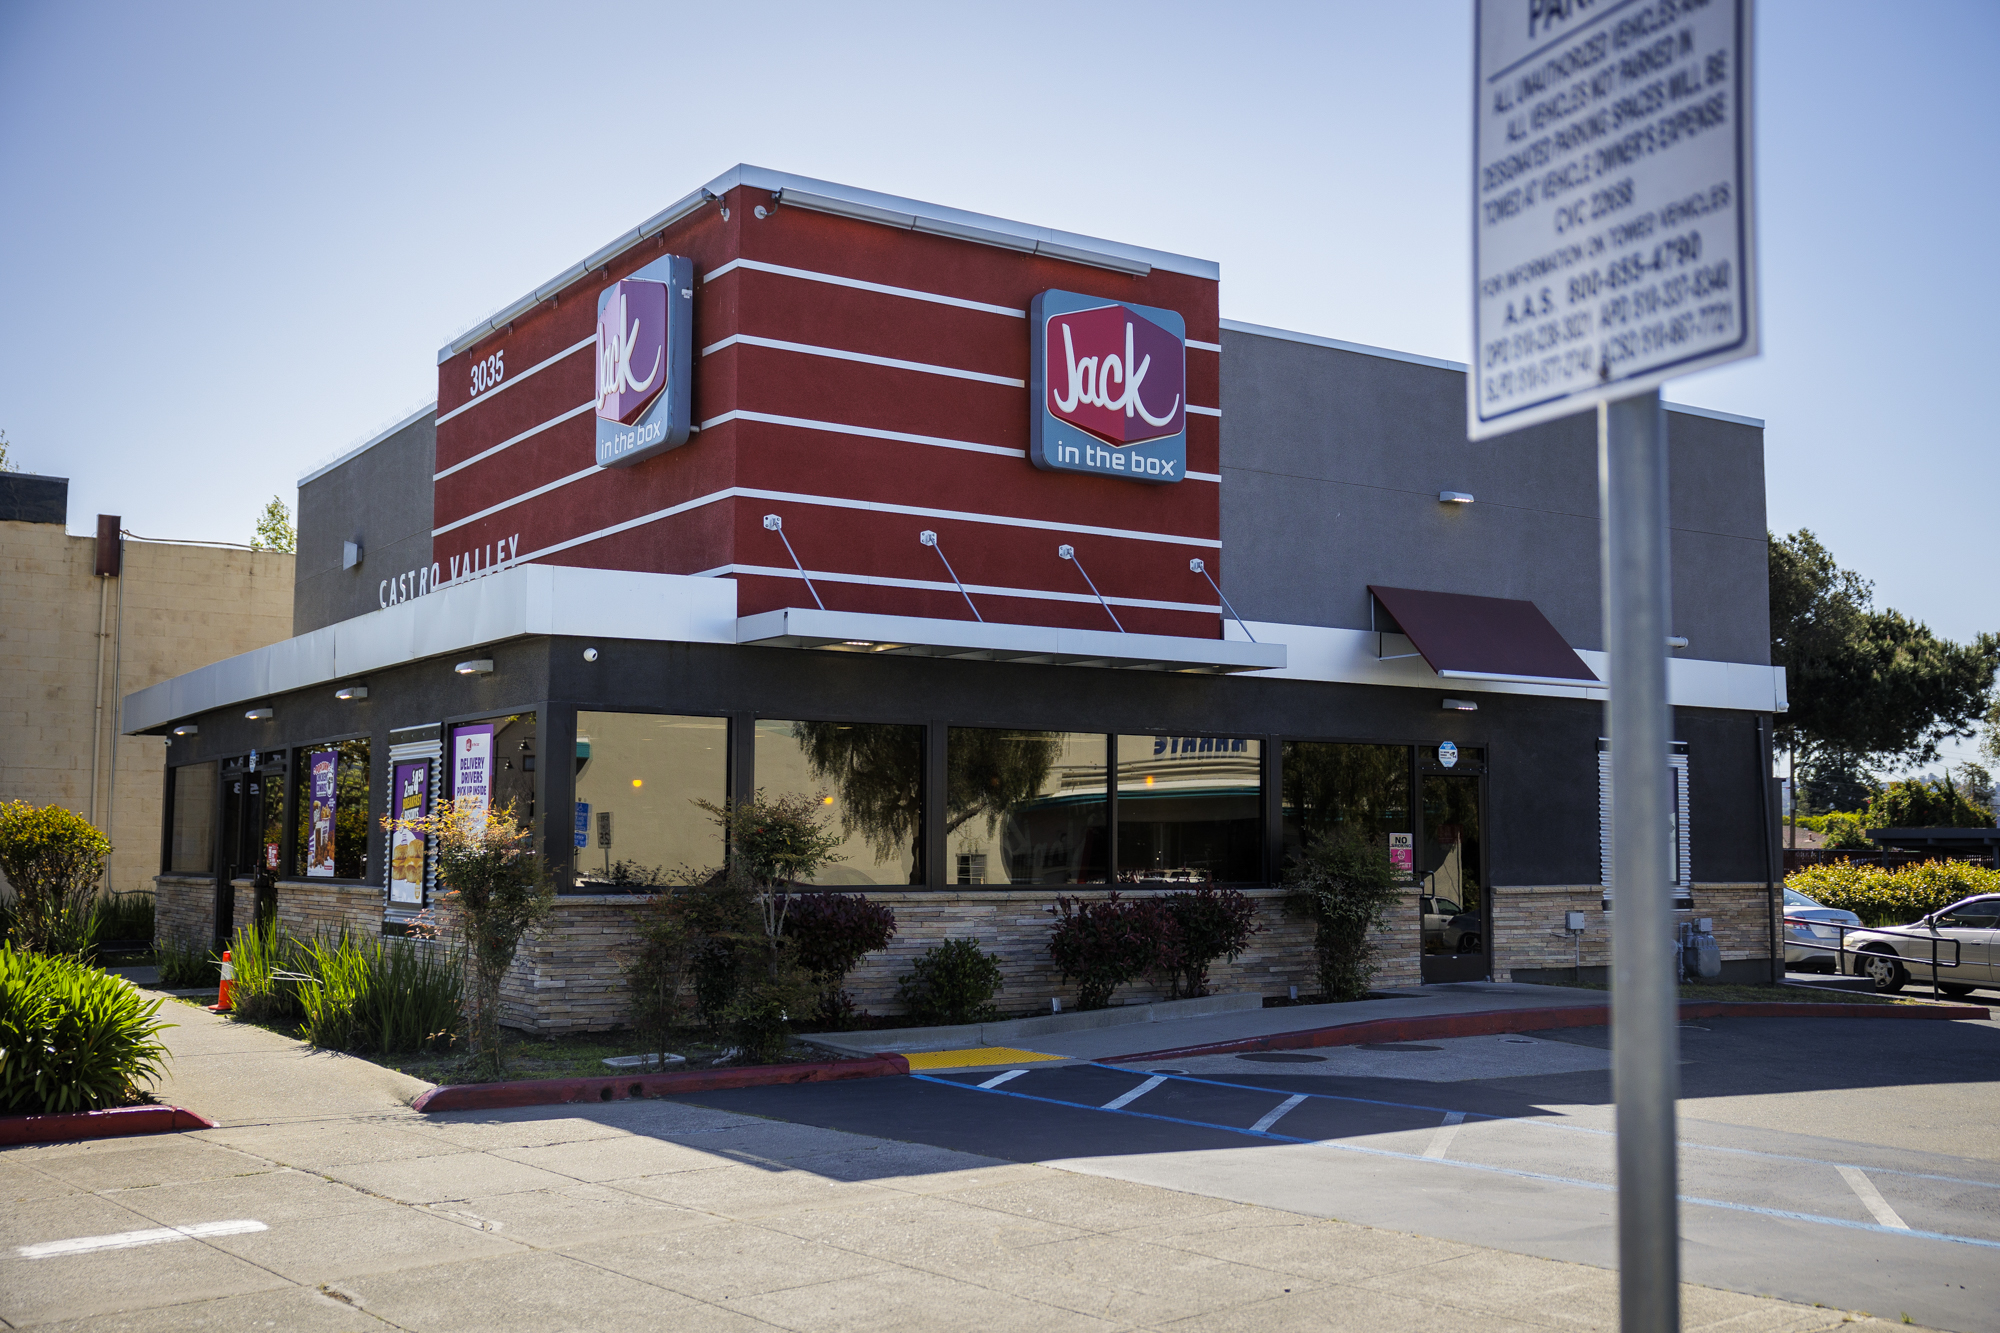 An outside view of a Jack in the Box restaurant.